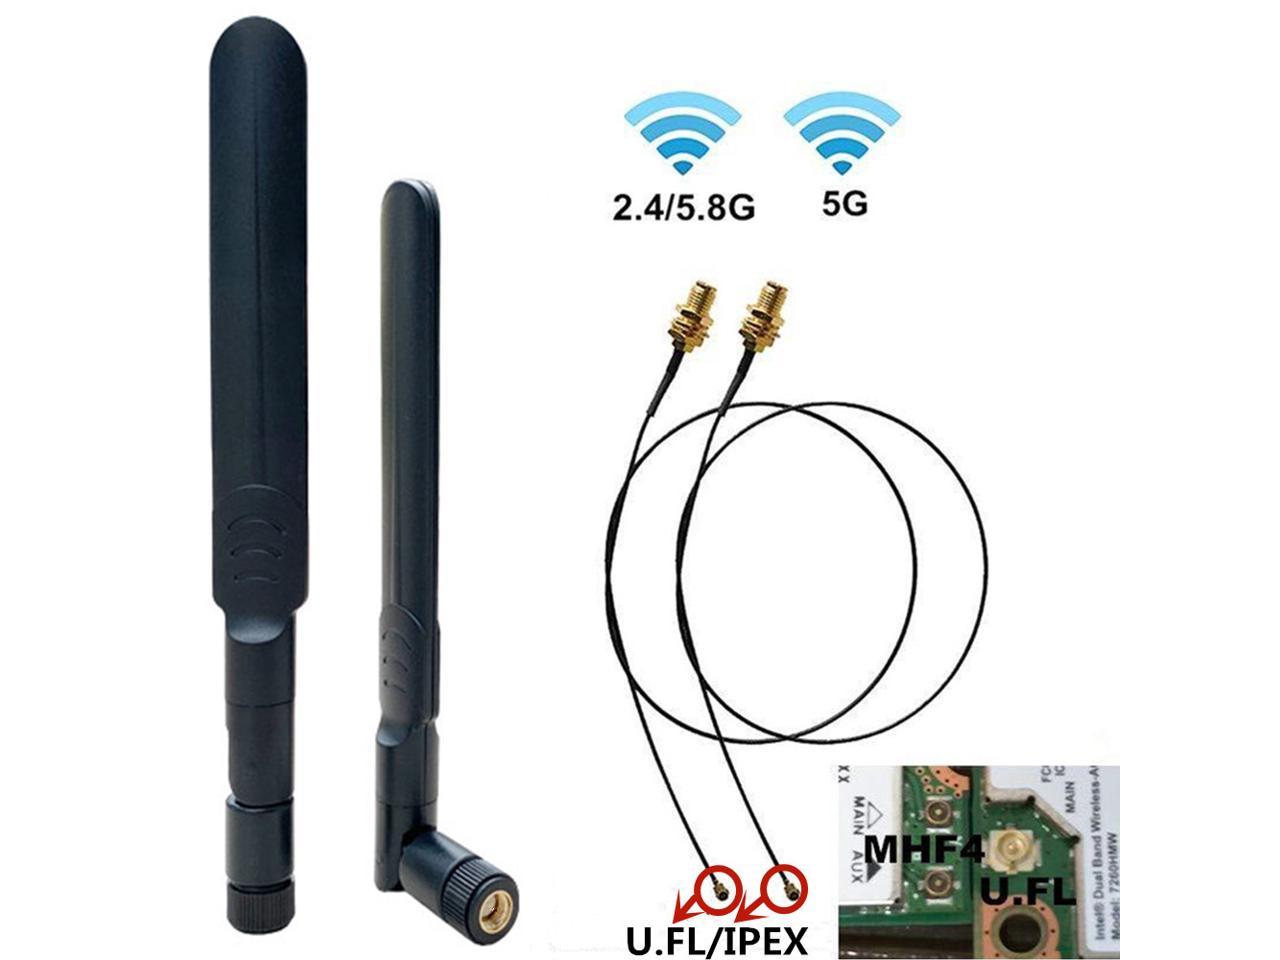 4 9dBi Dual Band RP-SMA WiFi Antenna U.fl Cable Mod Kit For Asus D-Link Router 